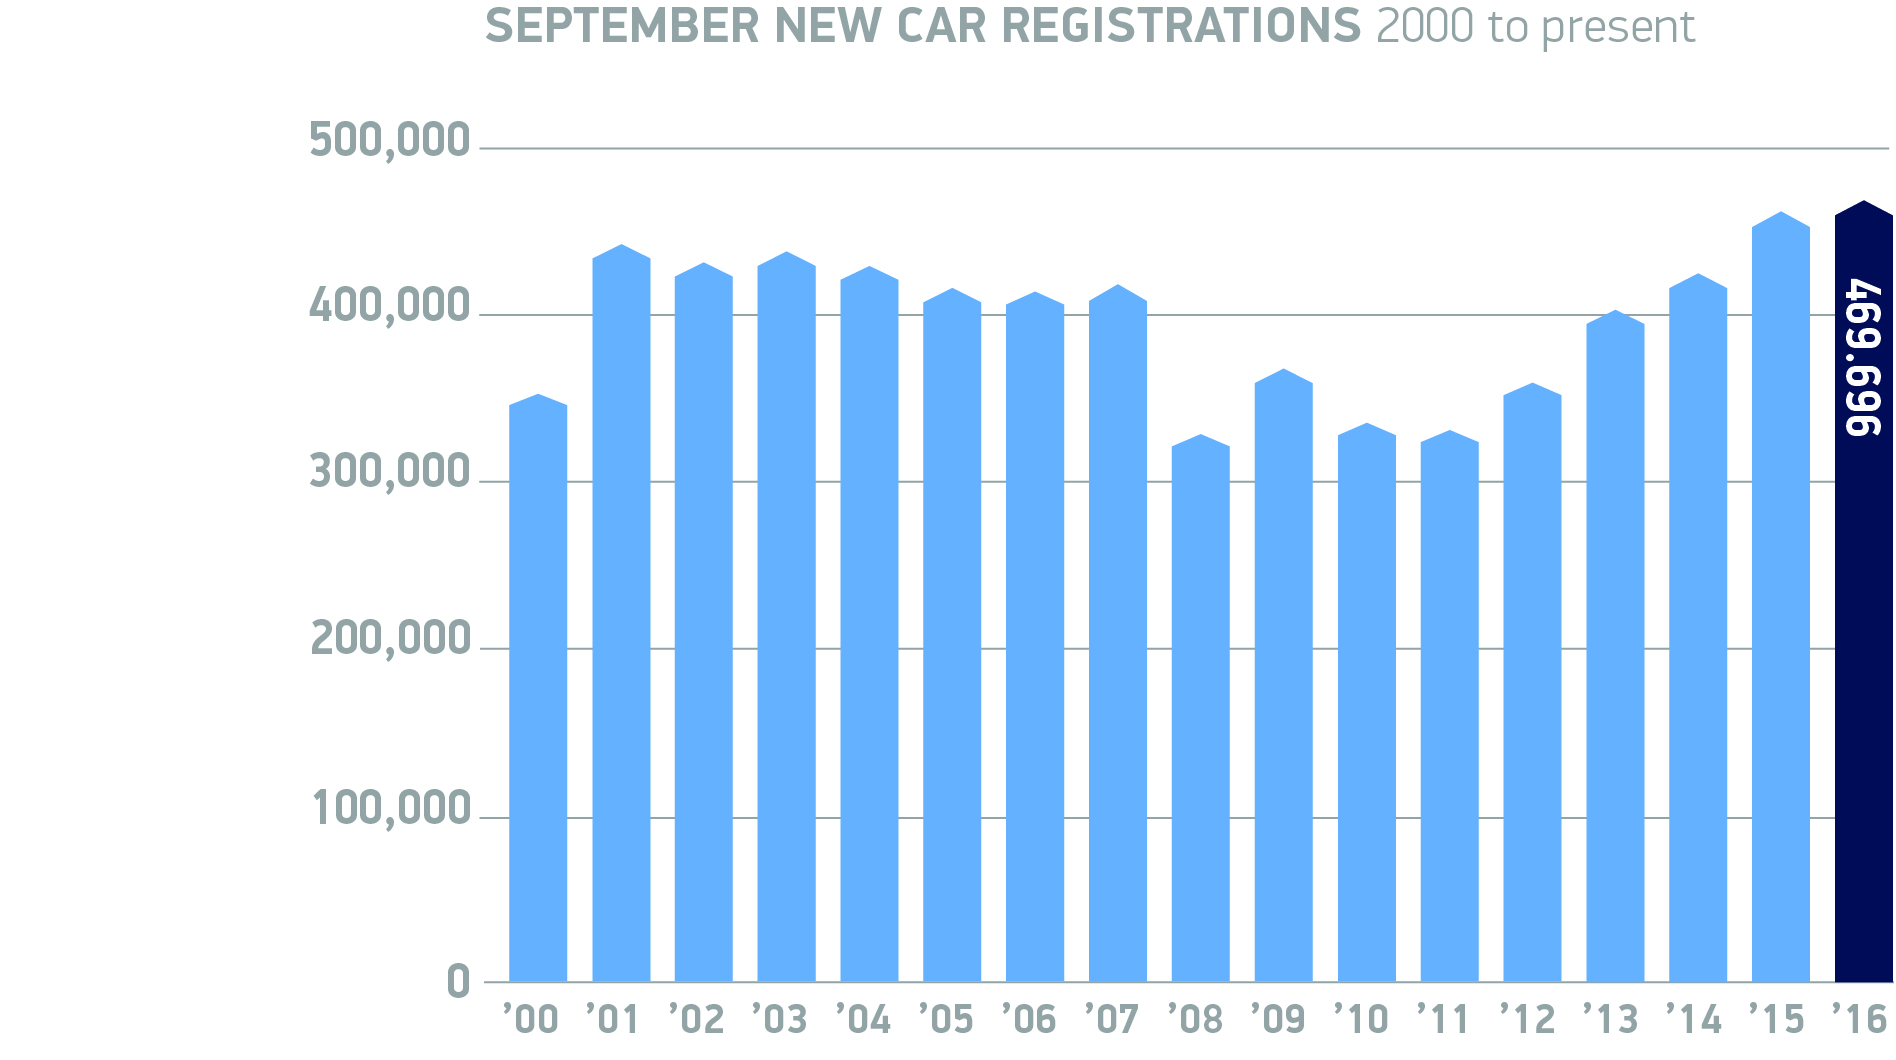 september-new-car-registrations-2000-to-present-chart